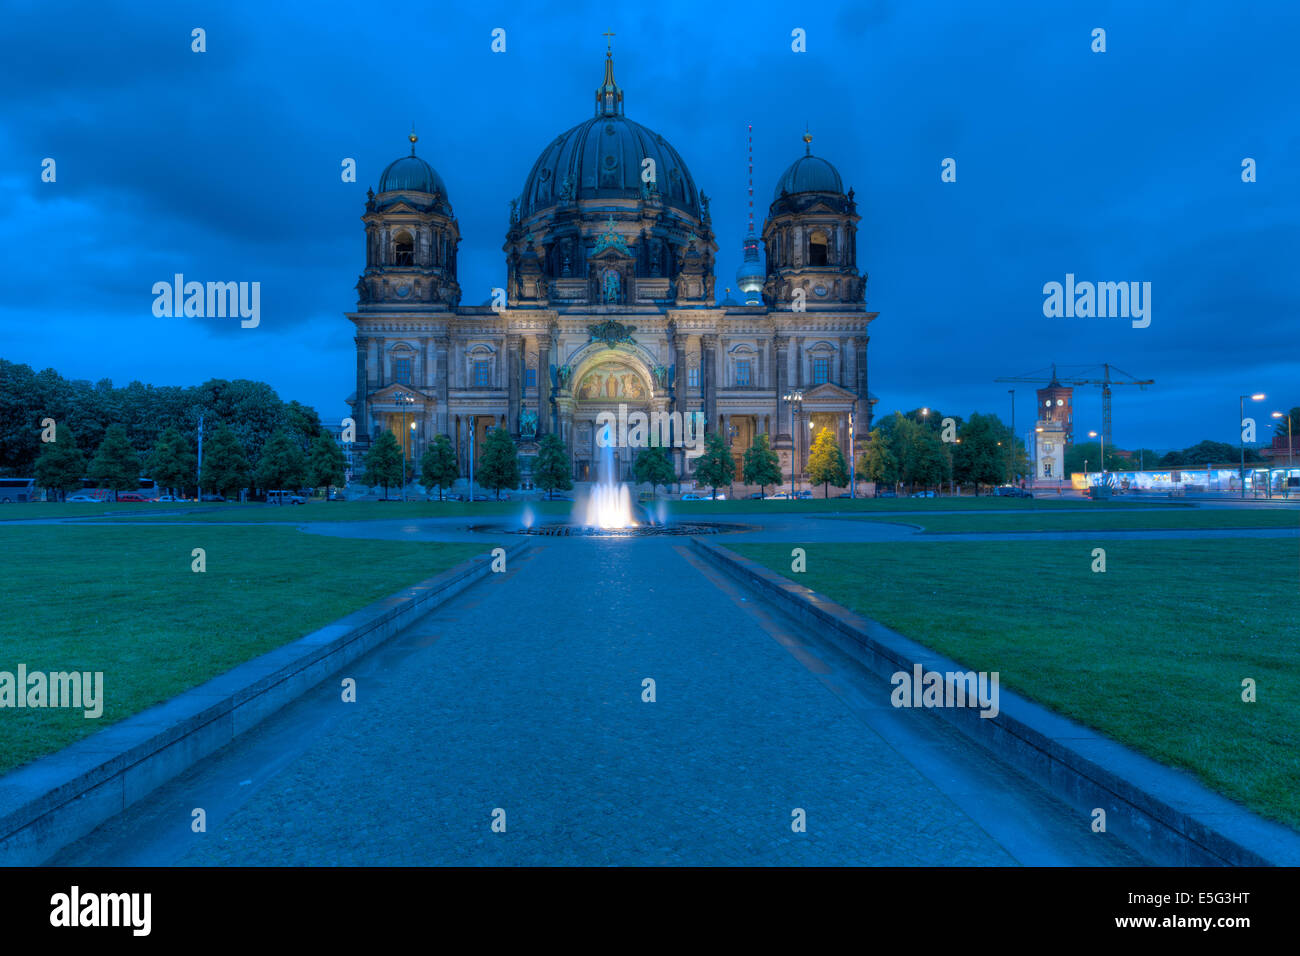 The hundred year old Berlin Cathedral (Berliner Dom) on Museum Island. Stock Photo